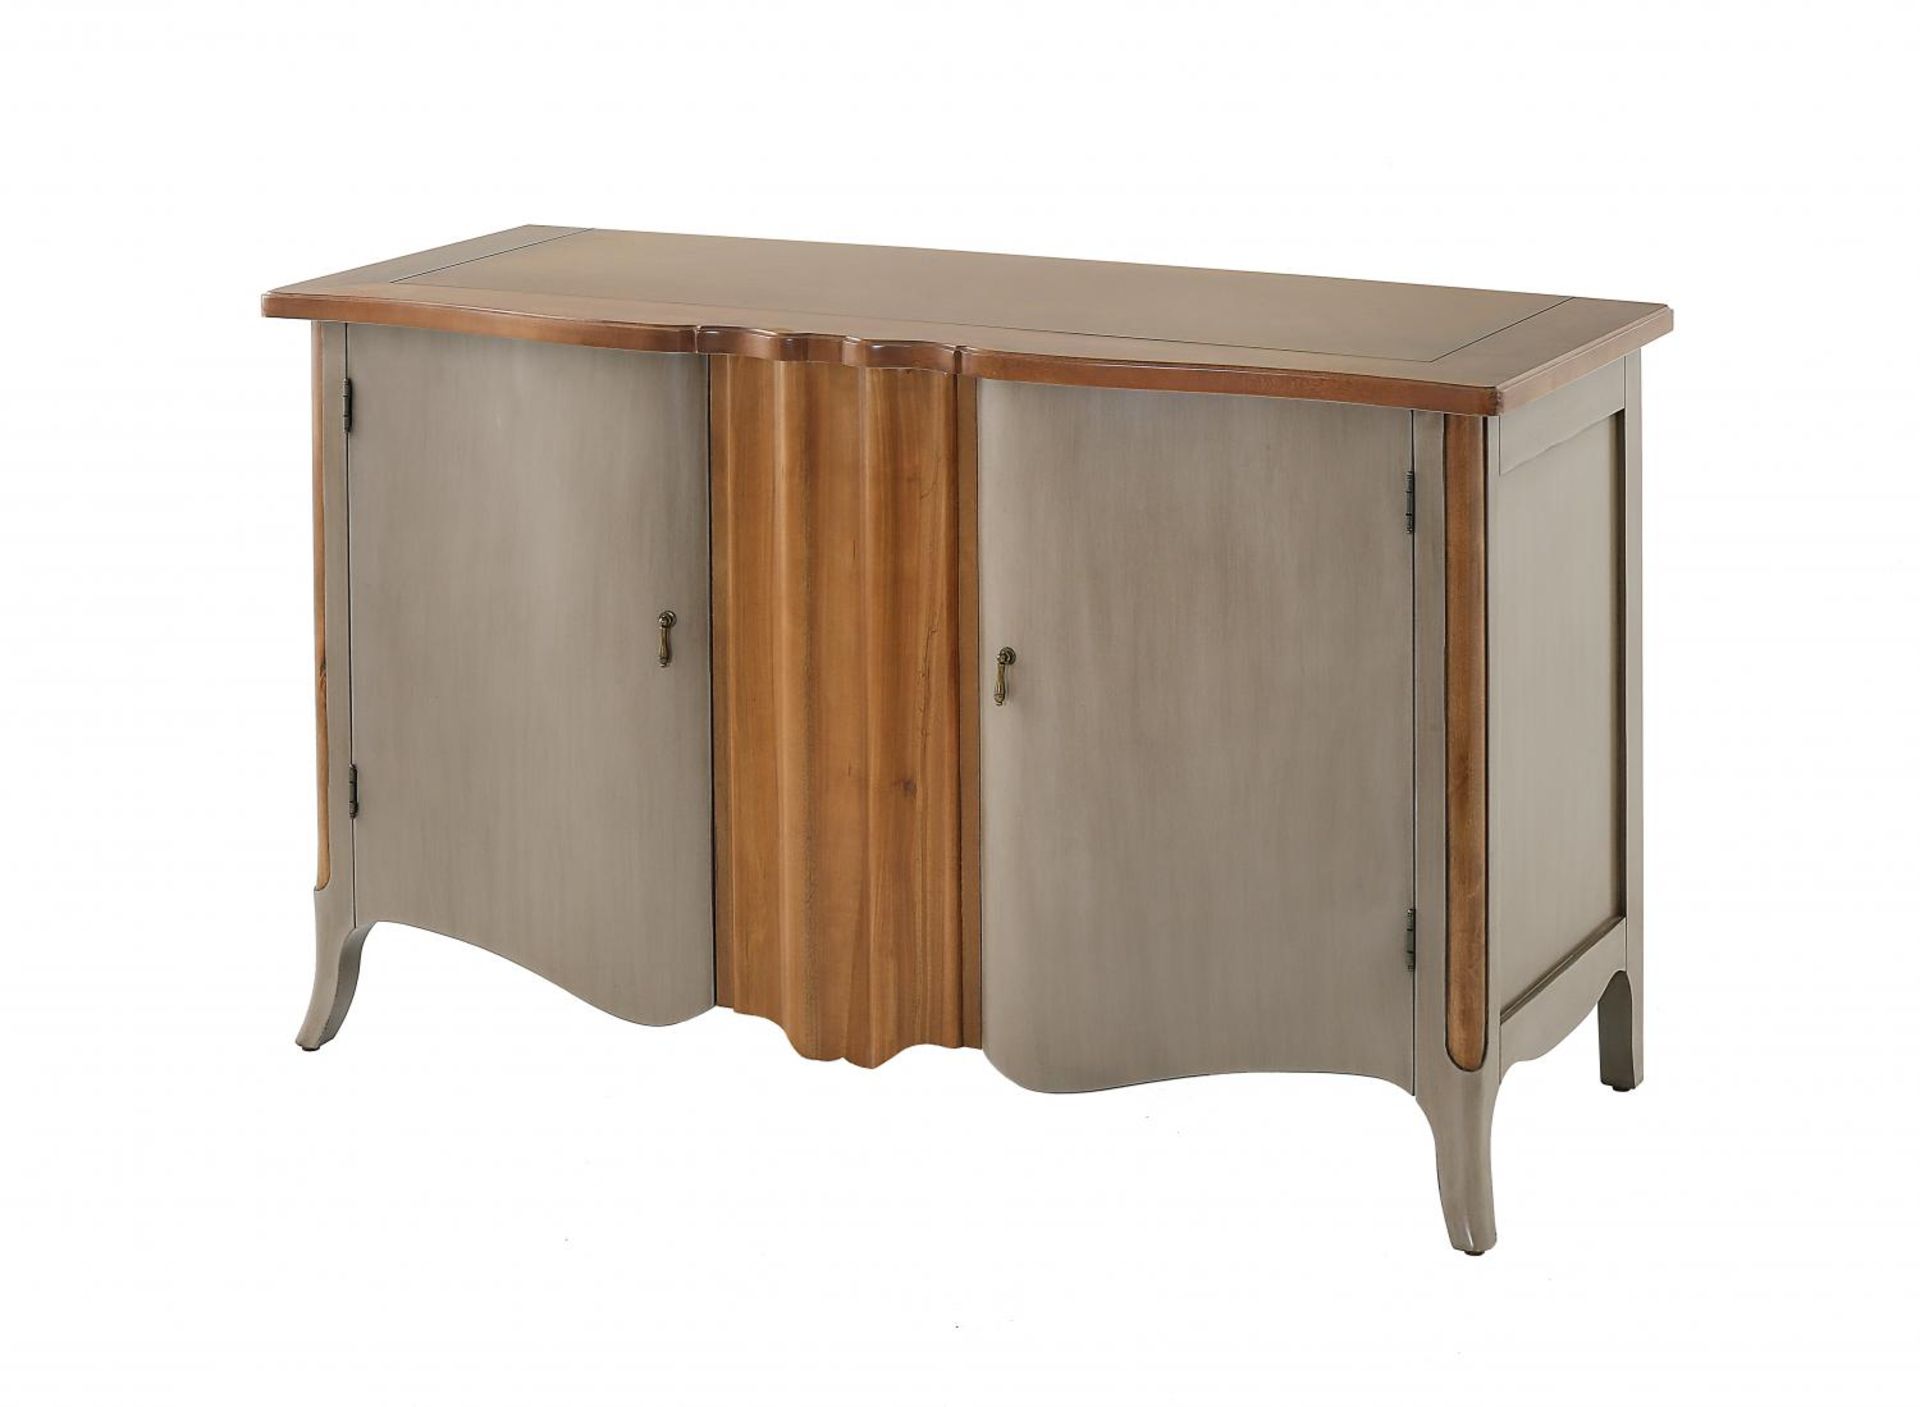 Dawson Sideboard – Cocoa The perfect cross between a modern finish and a traditional touch, this